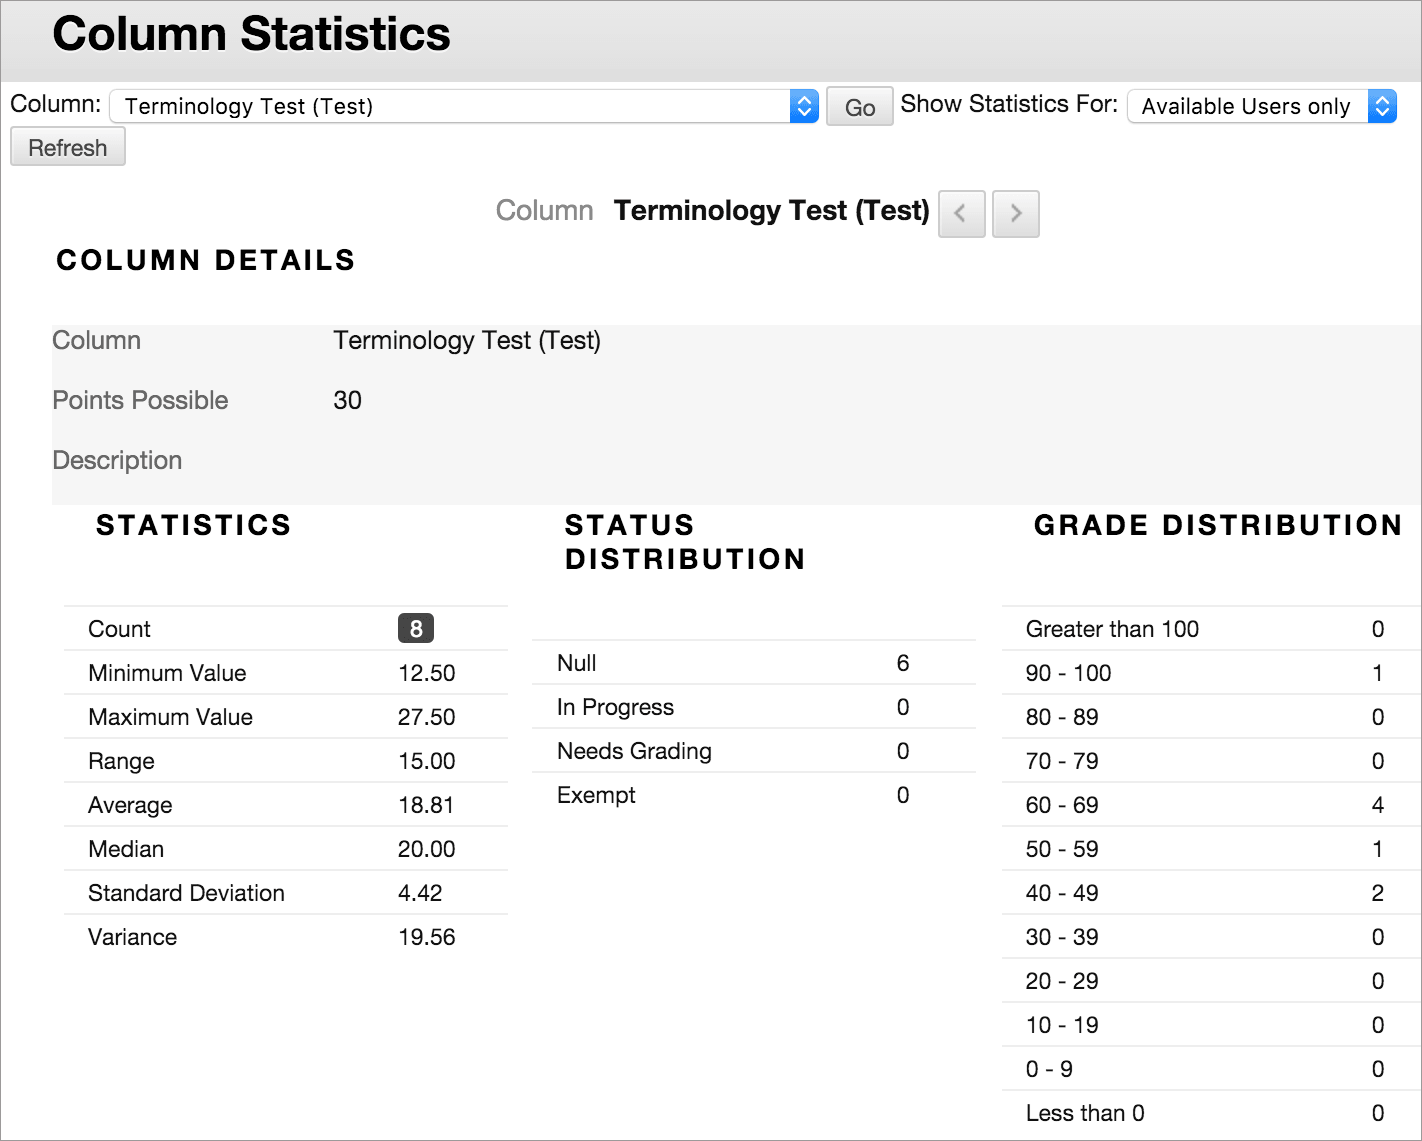 The Column Statistics page displays statistics for a grade item, including average, median, and standard deviation. You can also view how many need grading and how the grades are distributed.